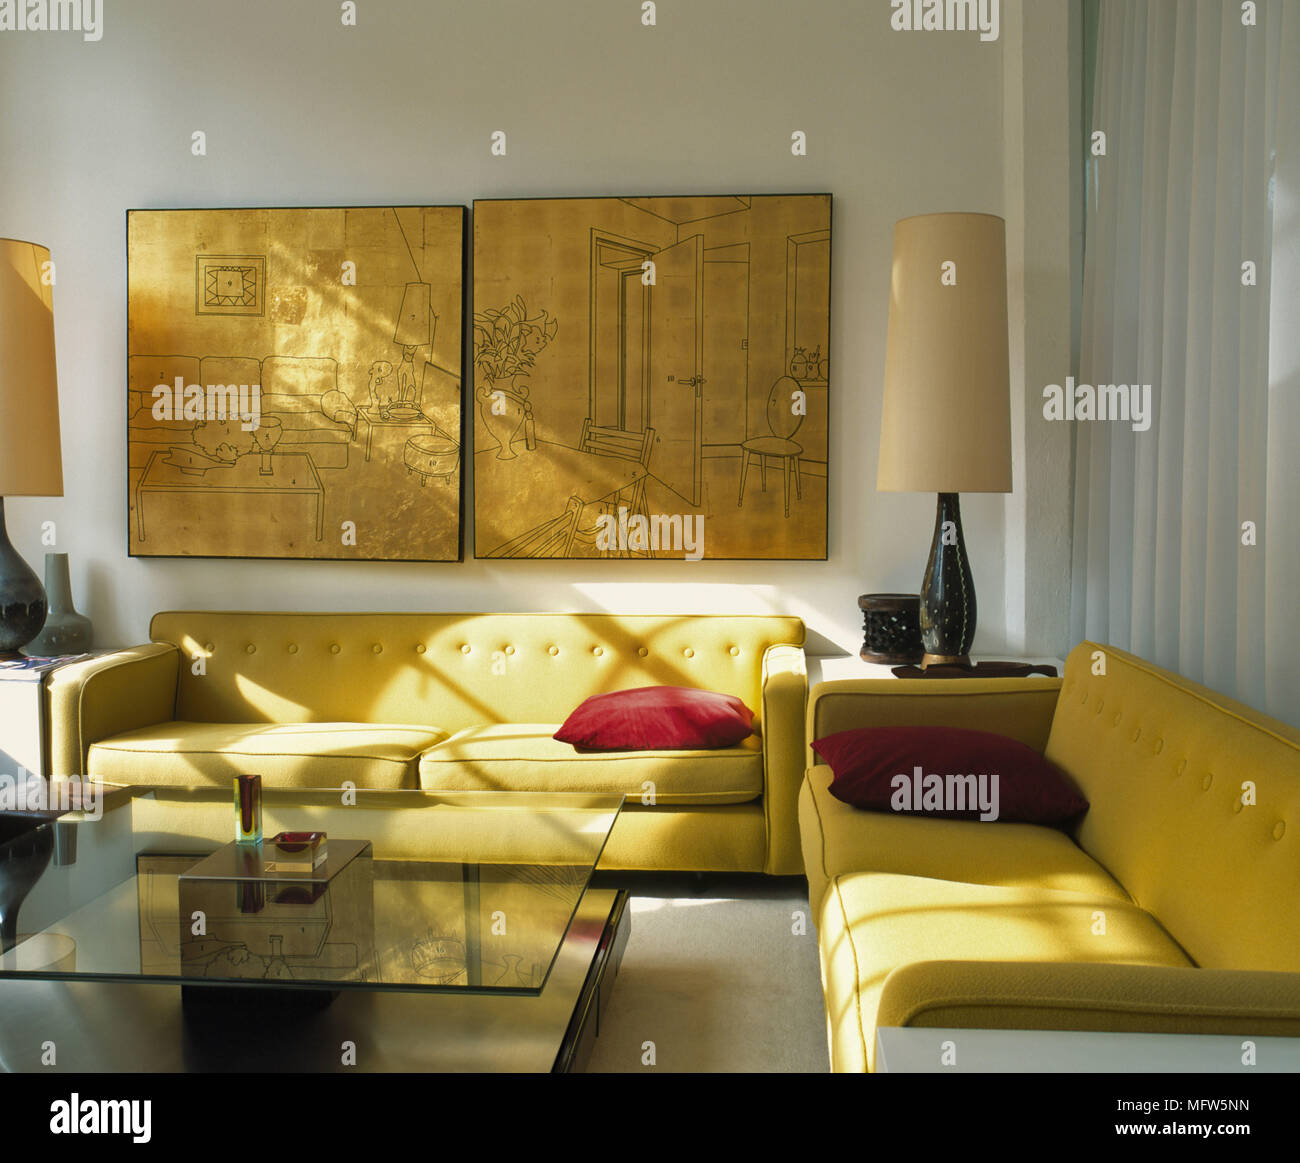 A modern sitting room pair of yellow upholstered sofas glass coffee table lamps artwork Stock Photo